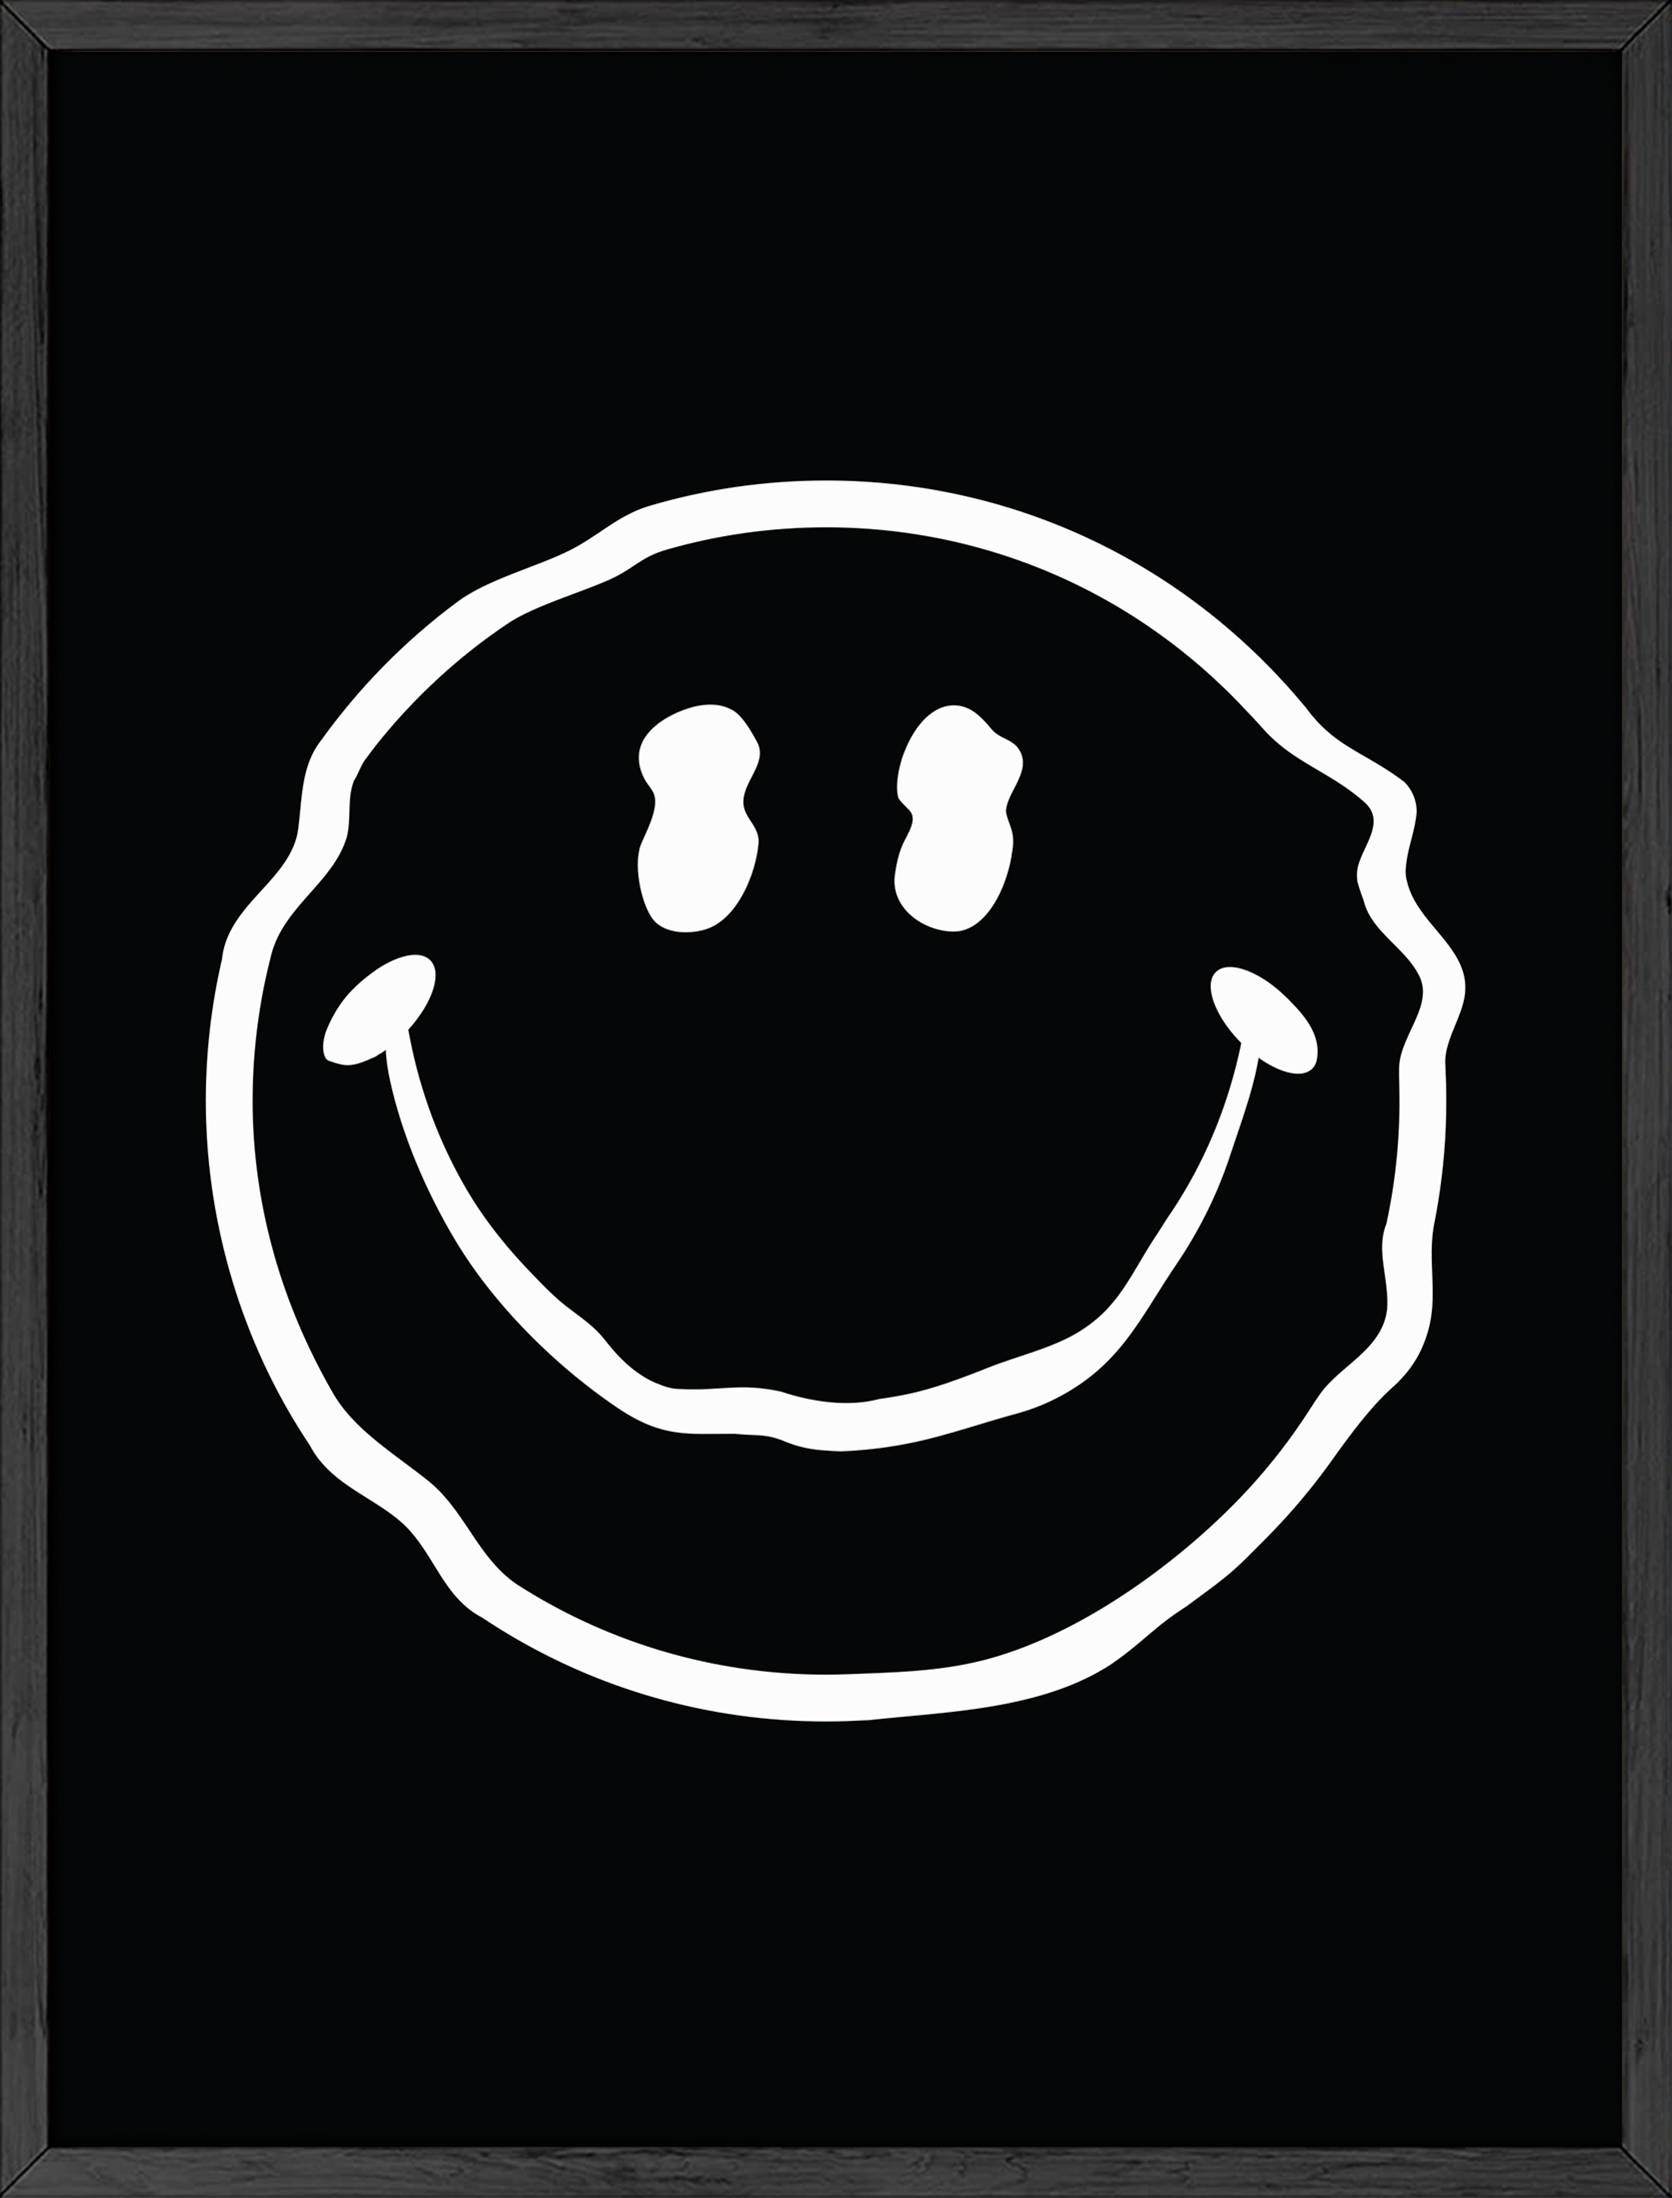 smiley face black and white